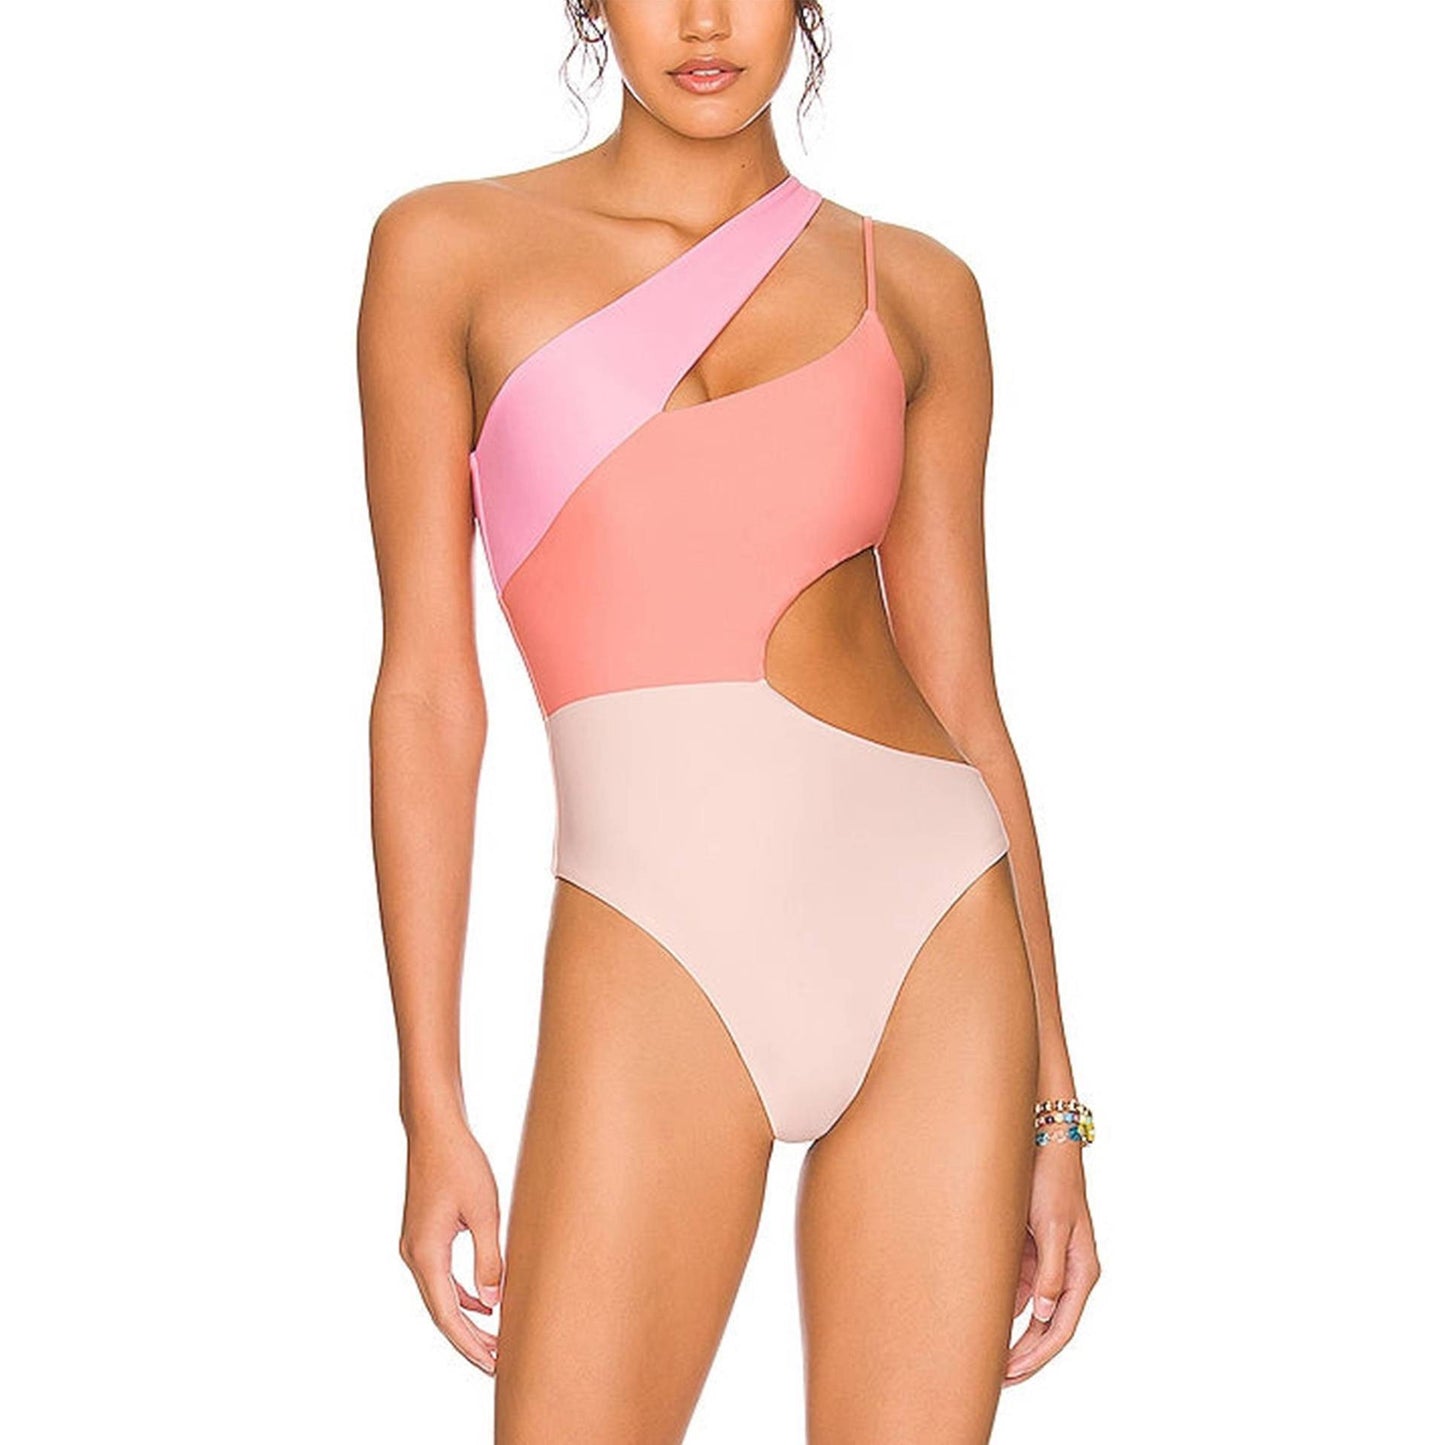 One Piece Fashionable Contrast Color Swimsuit apparel & accessories